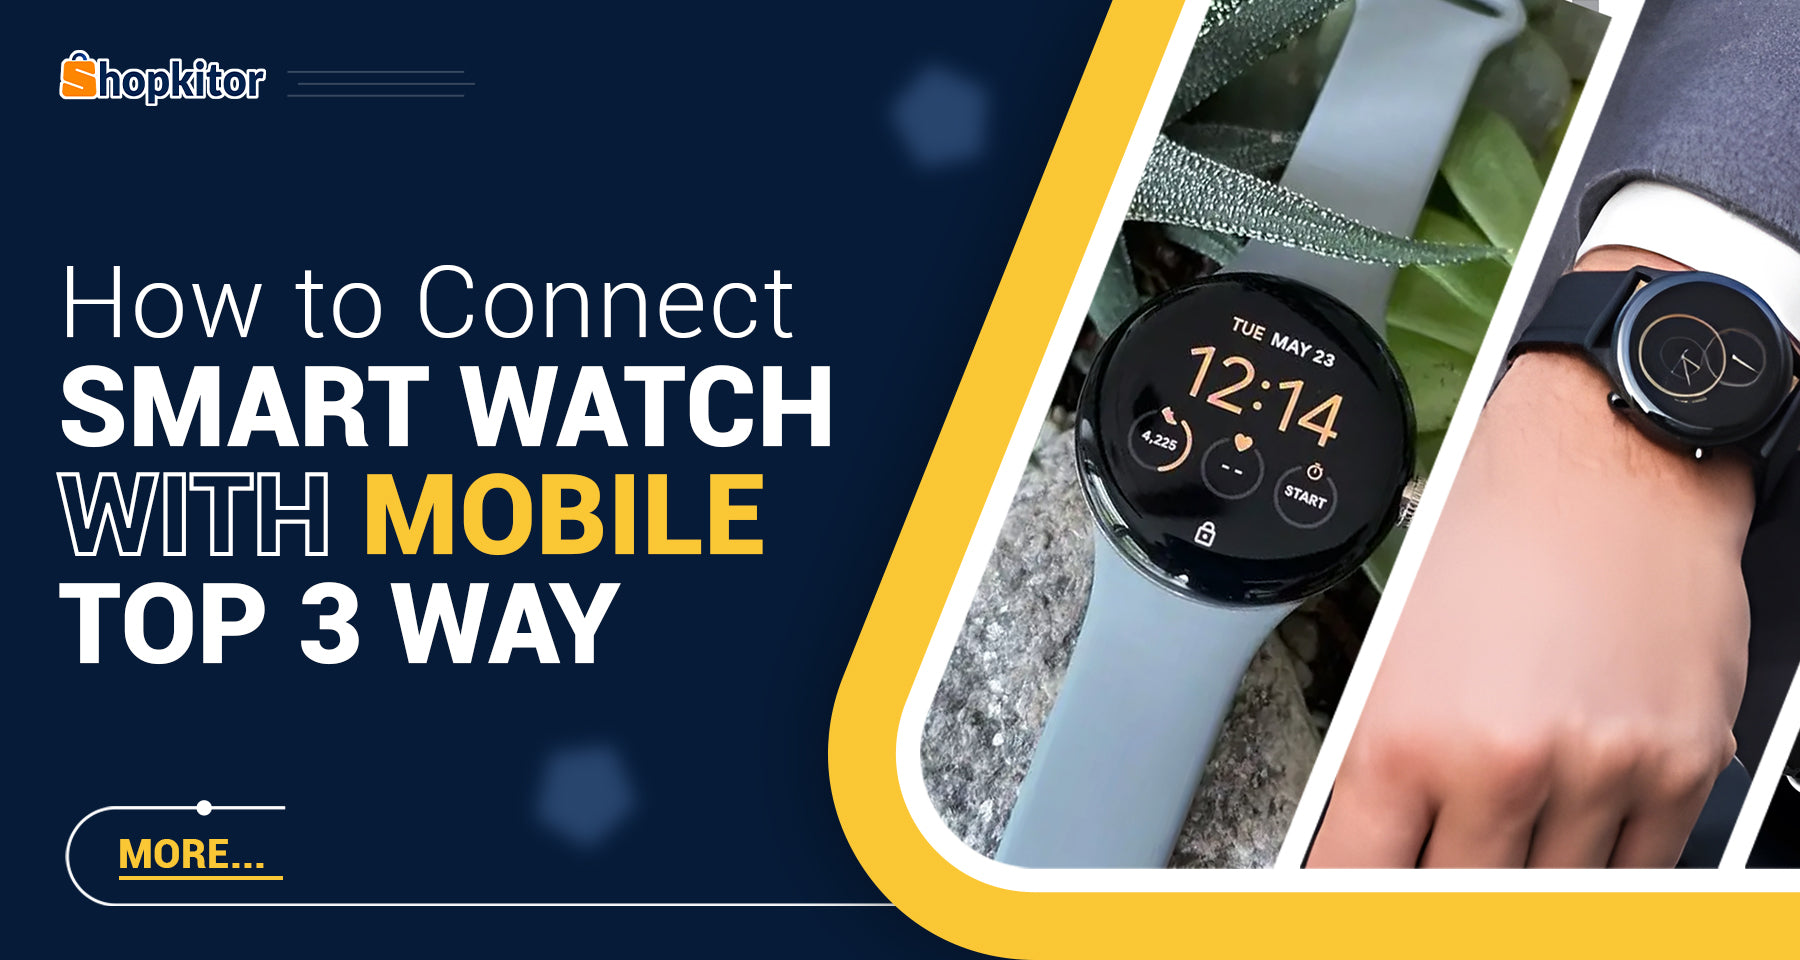 How to Connect Smart Watch with Mobile - Top 3 Ways